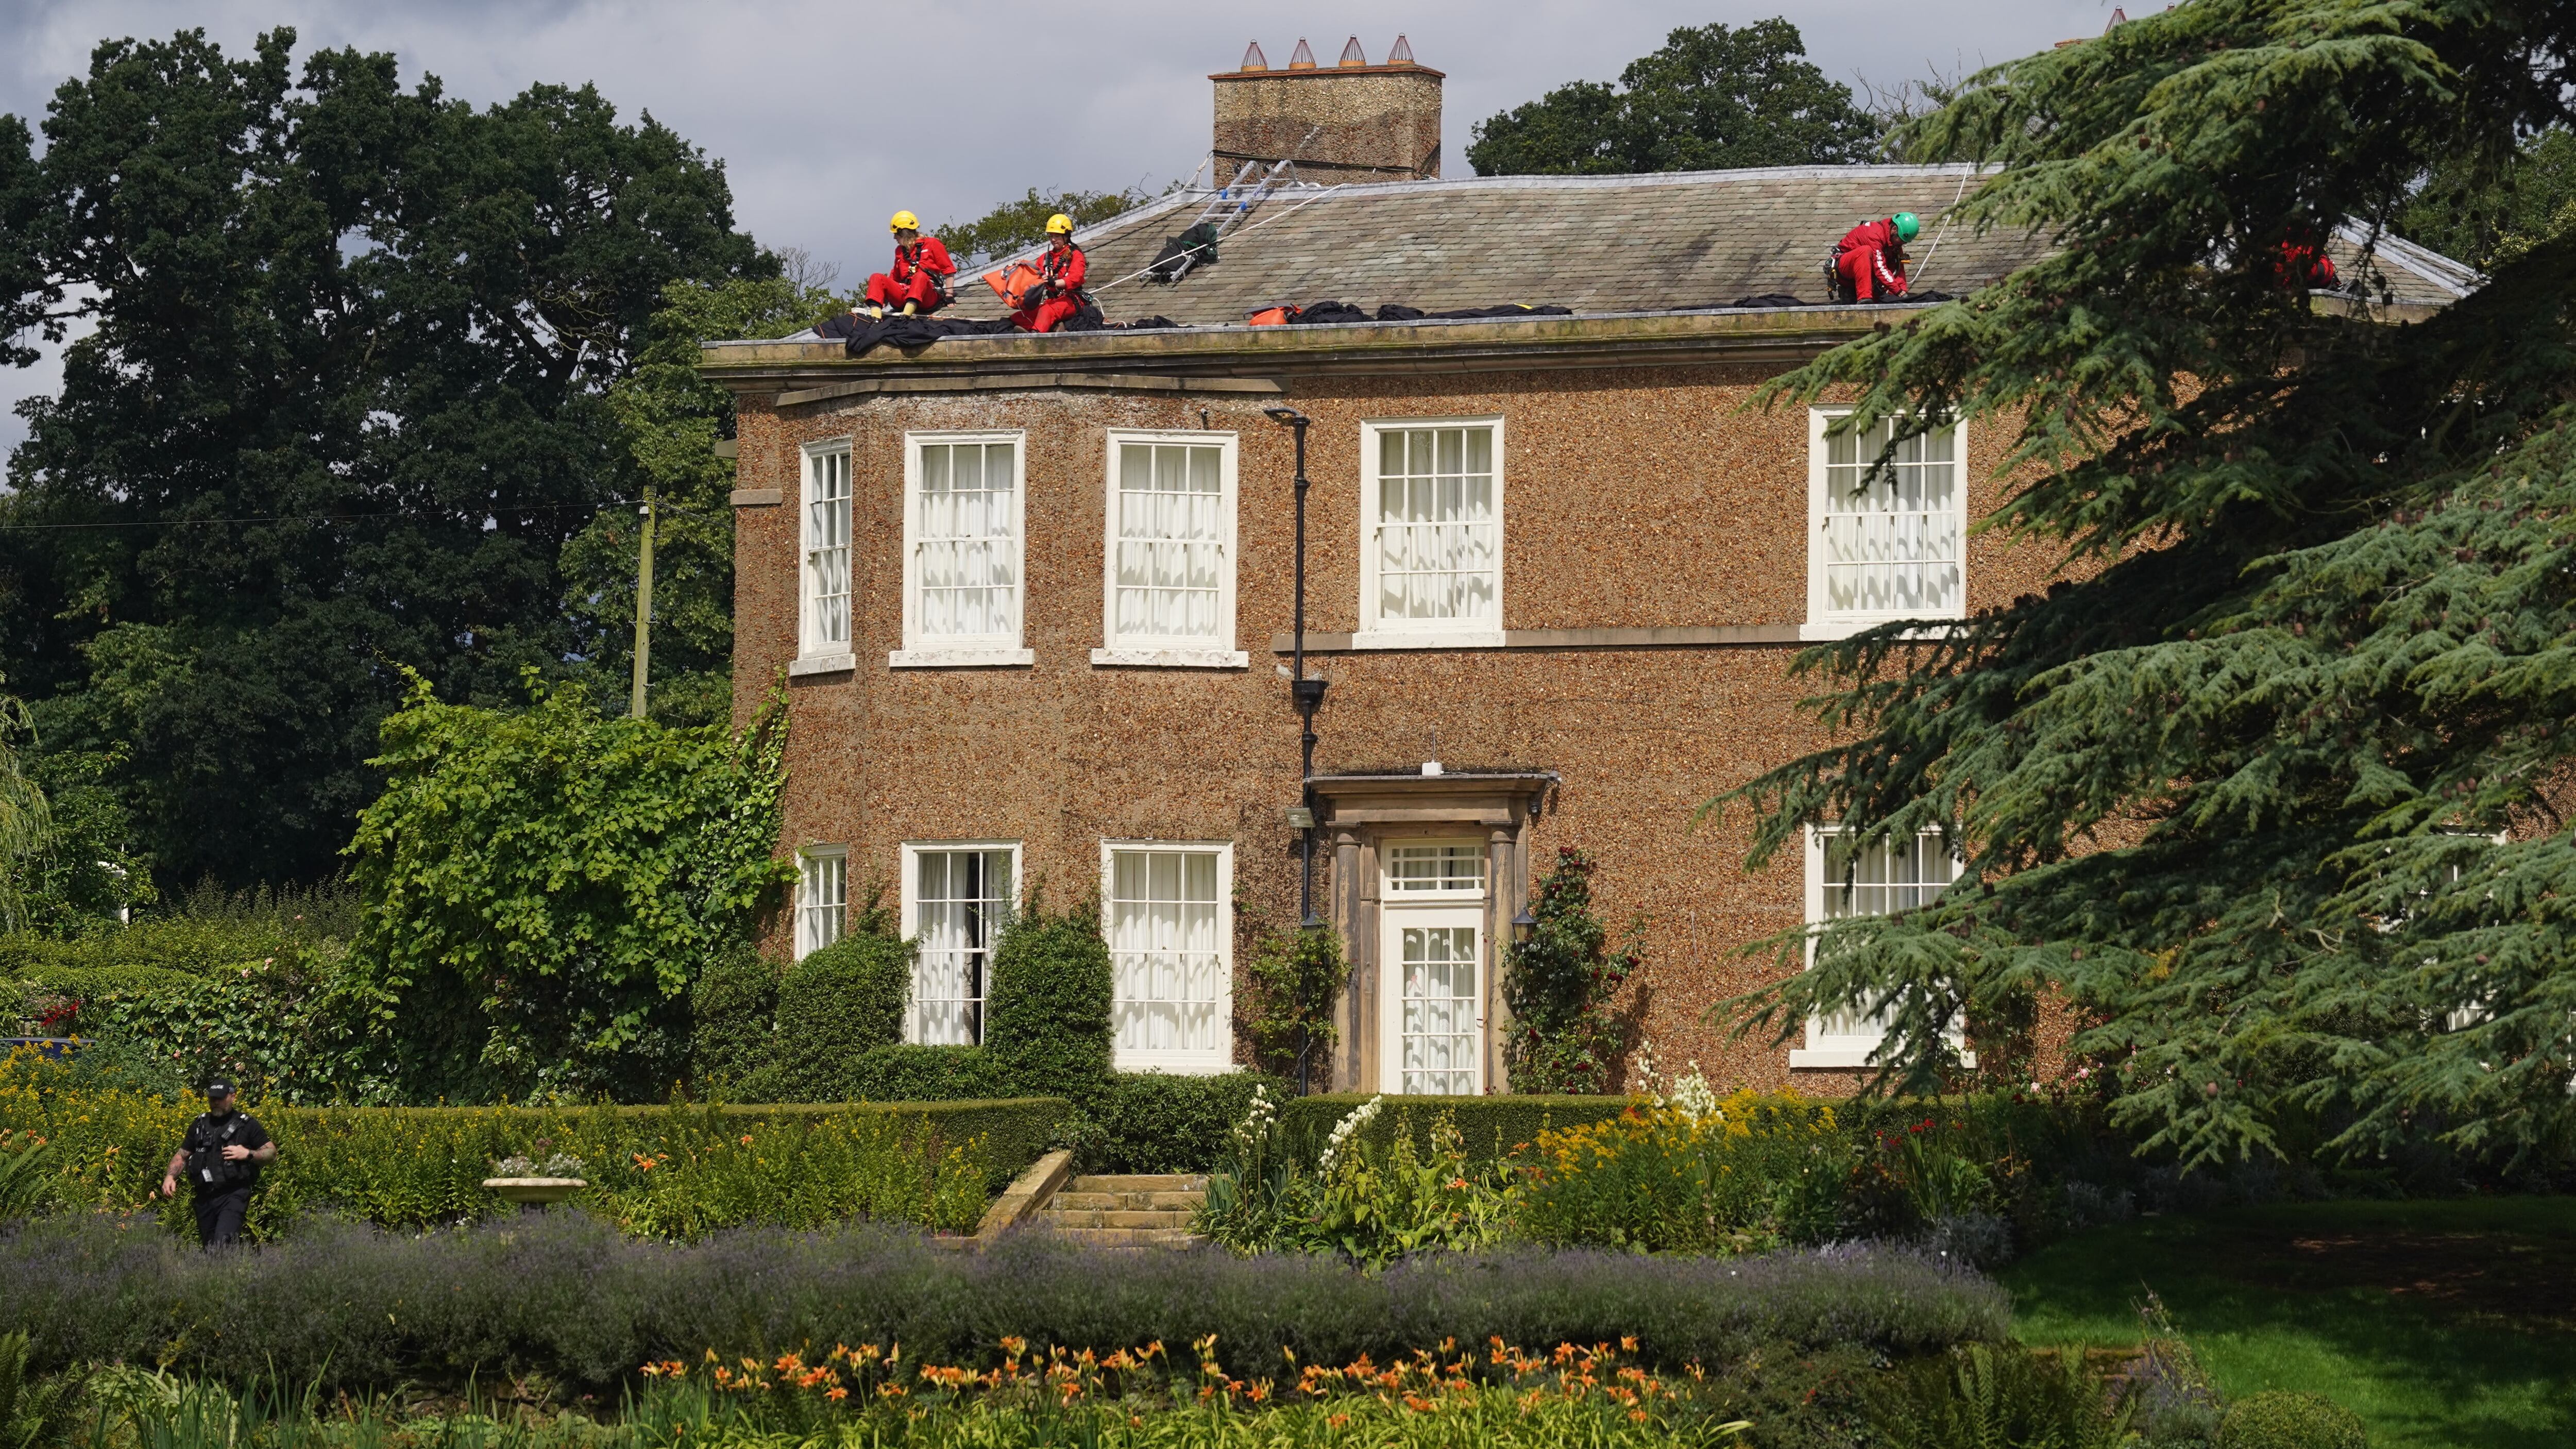 Activists moving fabric on the roof of Prime Minister Rishi Sunak’s house in Richmond, North Yorkshire after covering it in black fabric in protest at his backing for expansion of North Sea oil and gas drilling. Picture date: Thursday August 3, 2023.